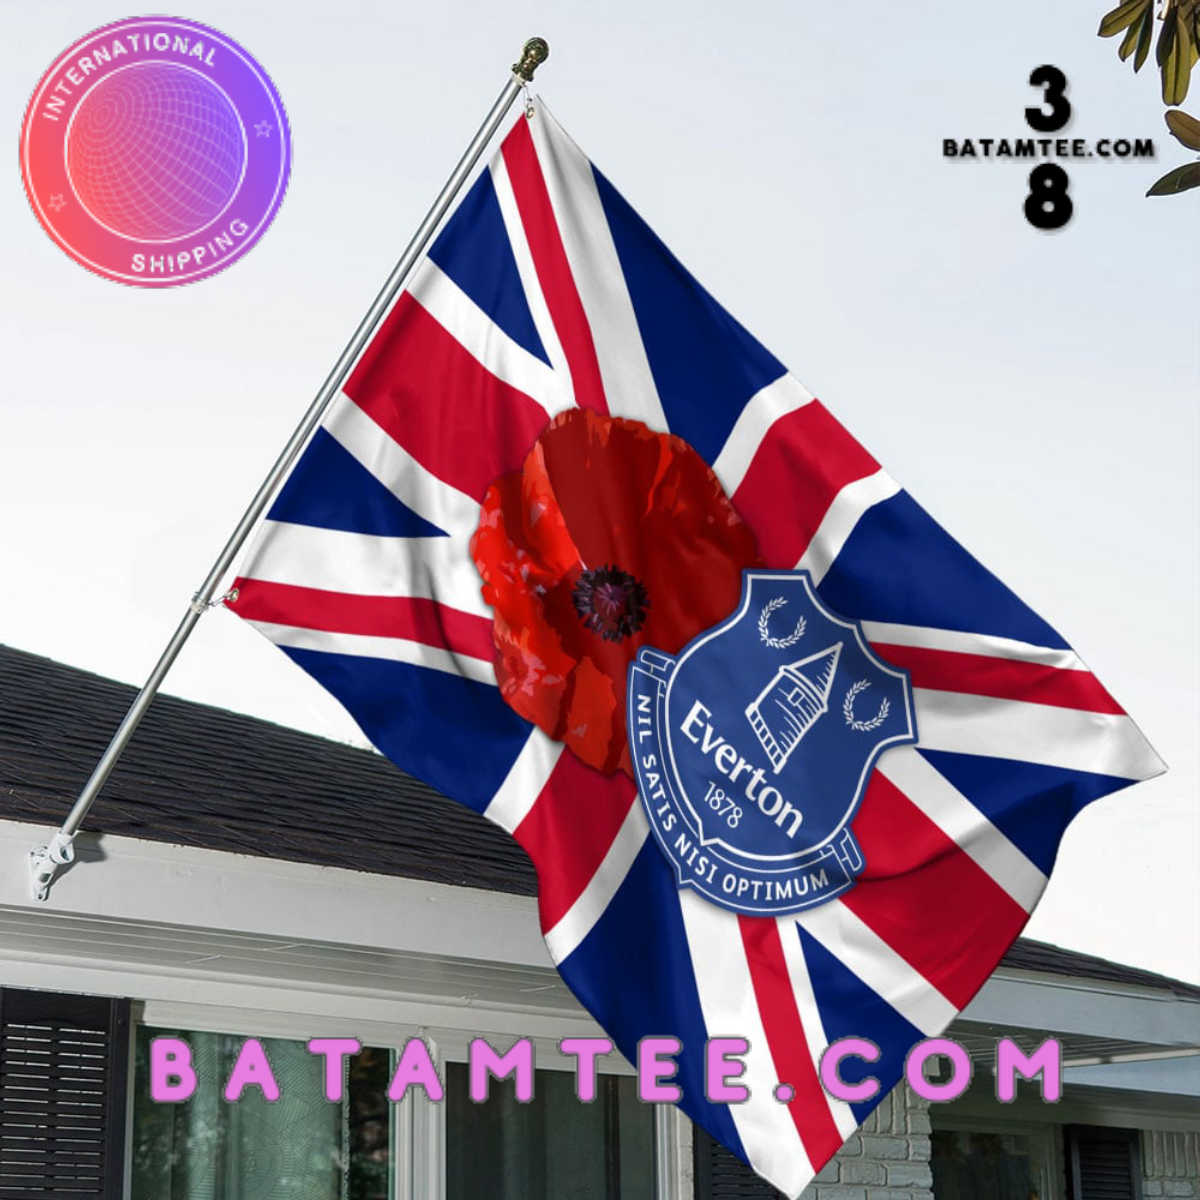 New House Everton FC flag Remembrance day collection - Batamtee Shop ...